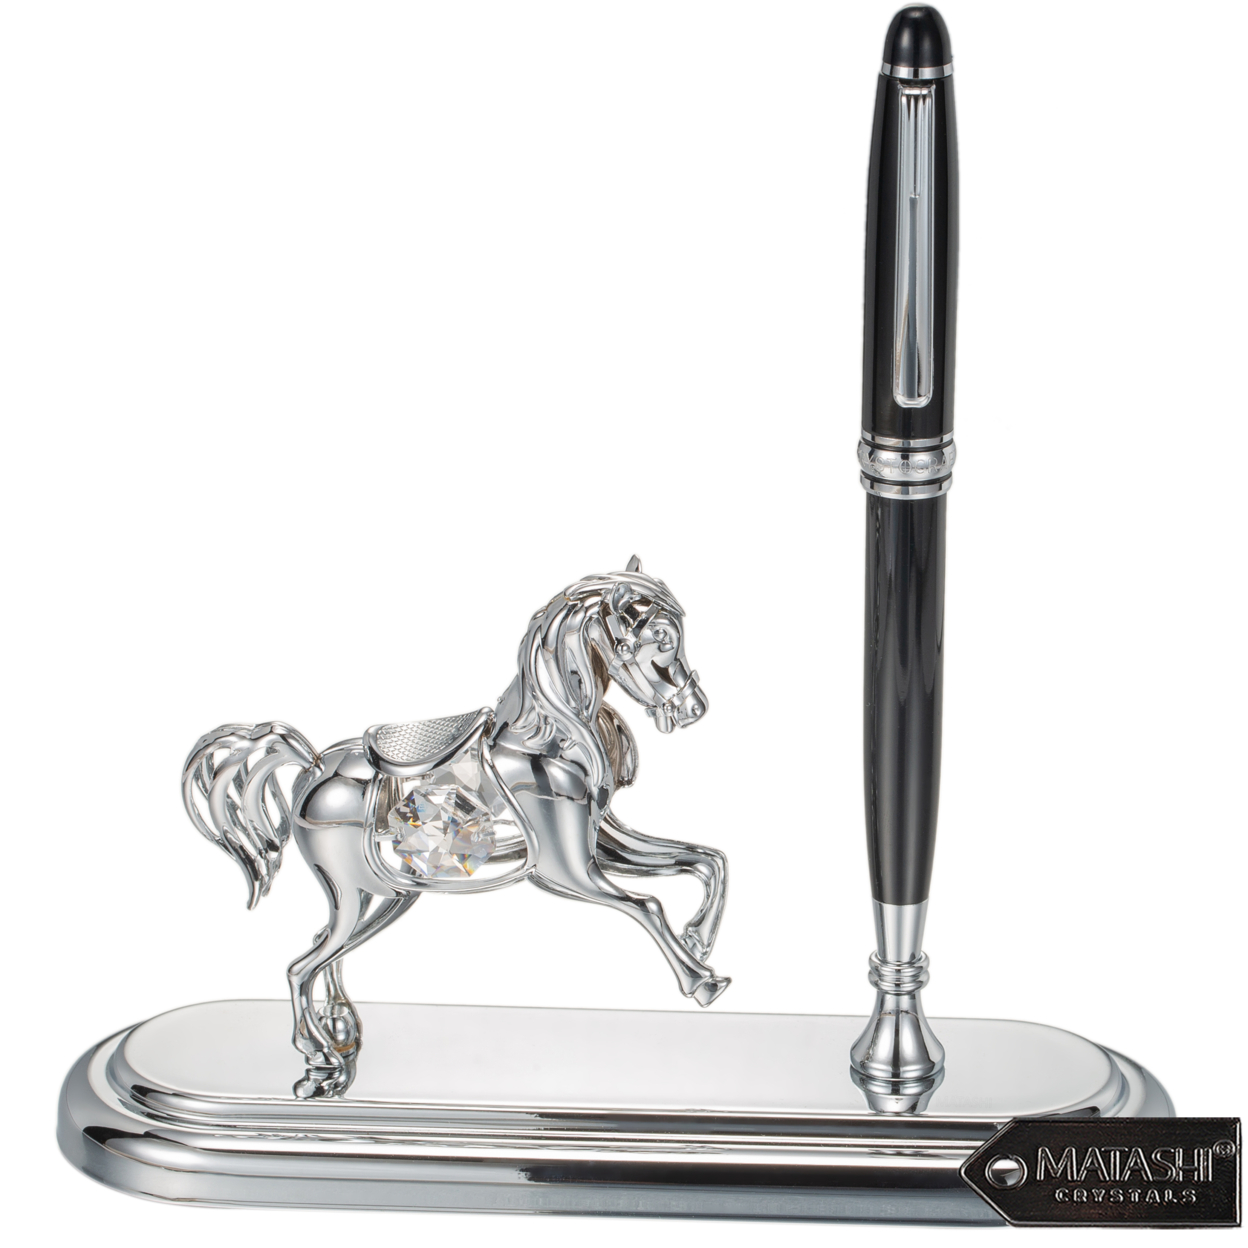 Matashi Chrome Plated Executive Desk Set W/ Pen & Silver Horse Ornament Desk Accessories Gift For Christmas Gift For Dad Boss Teacher